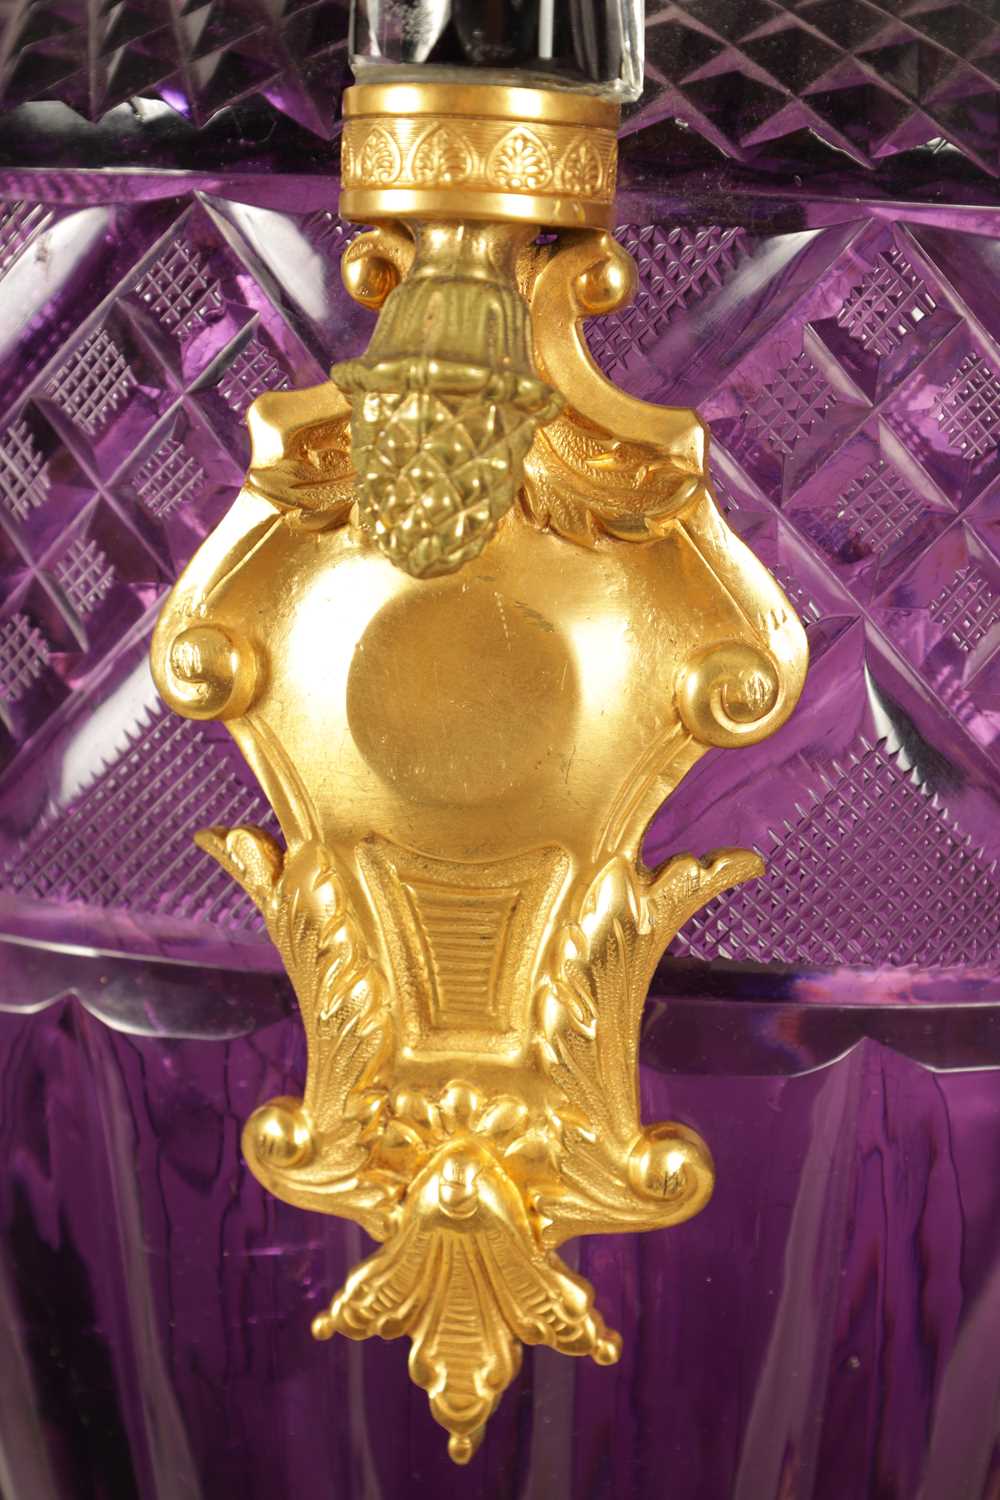 A LARGE PAIR OF LATE 19TH/EARLY 20TH CENTURY RUSSIAN ORMOLU MOUNTED AMETHYST CUT-GLASS - Image 7 of 14